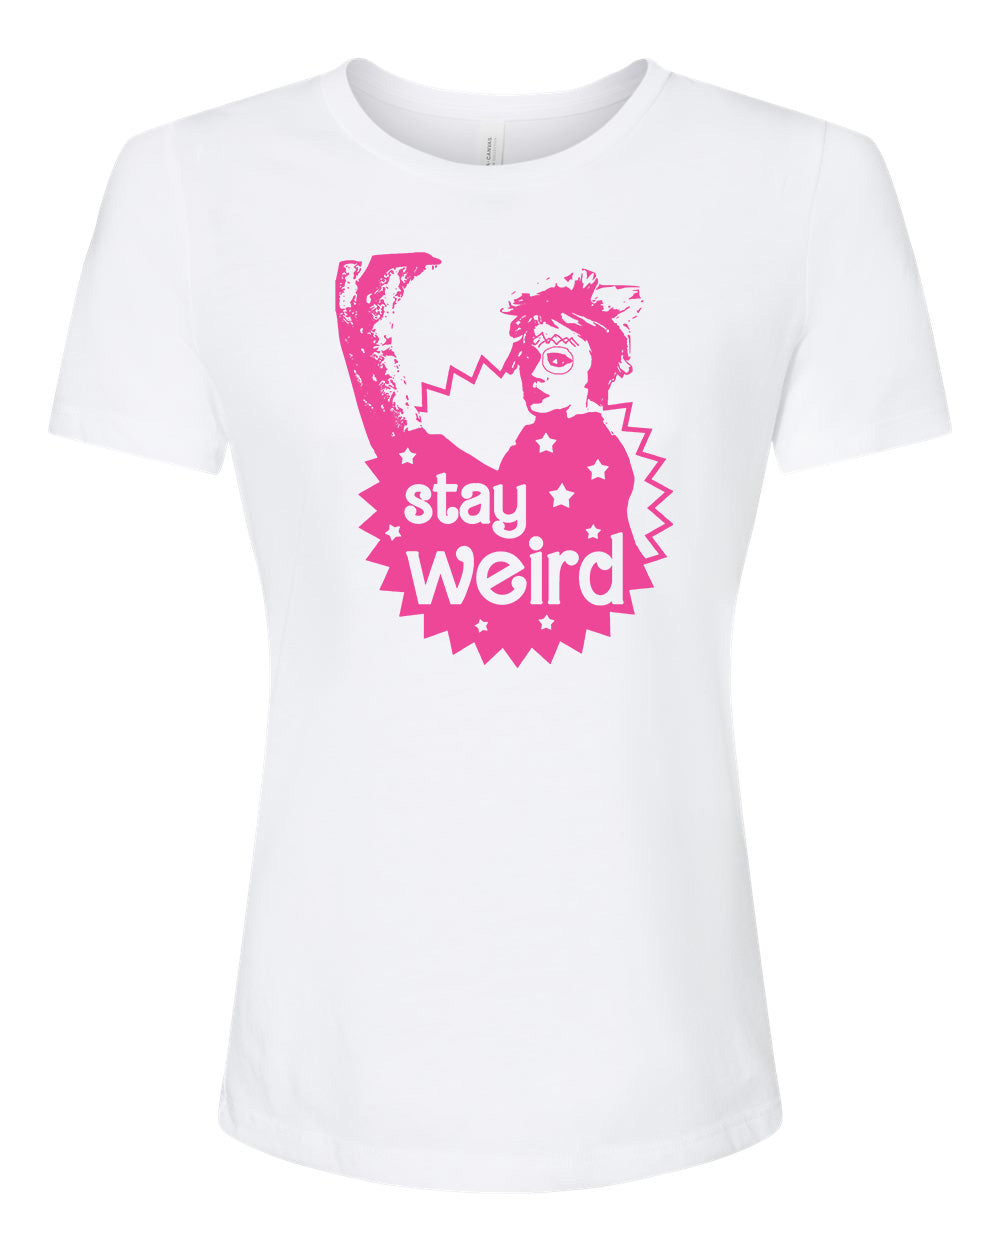 Stay Weird - Women's Crew Tee - White with Pink Ink